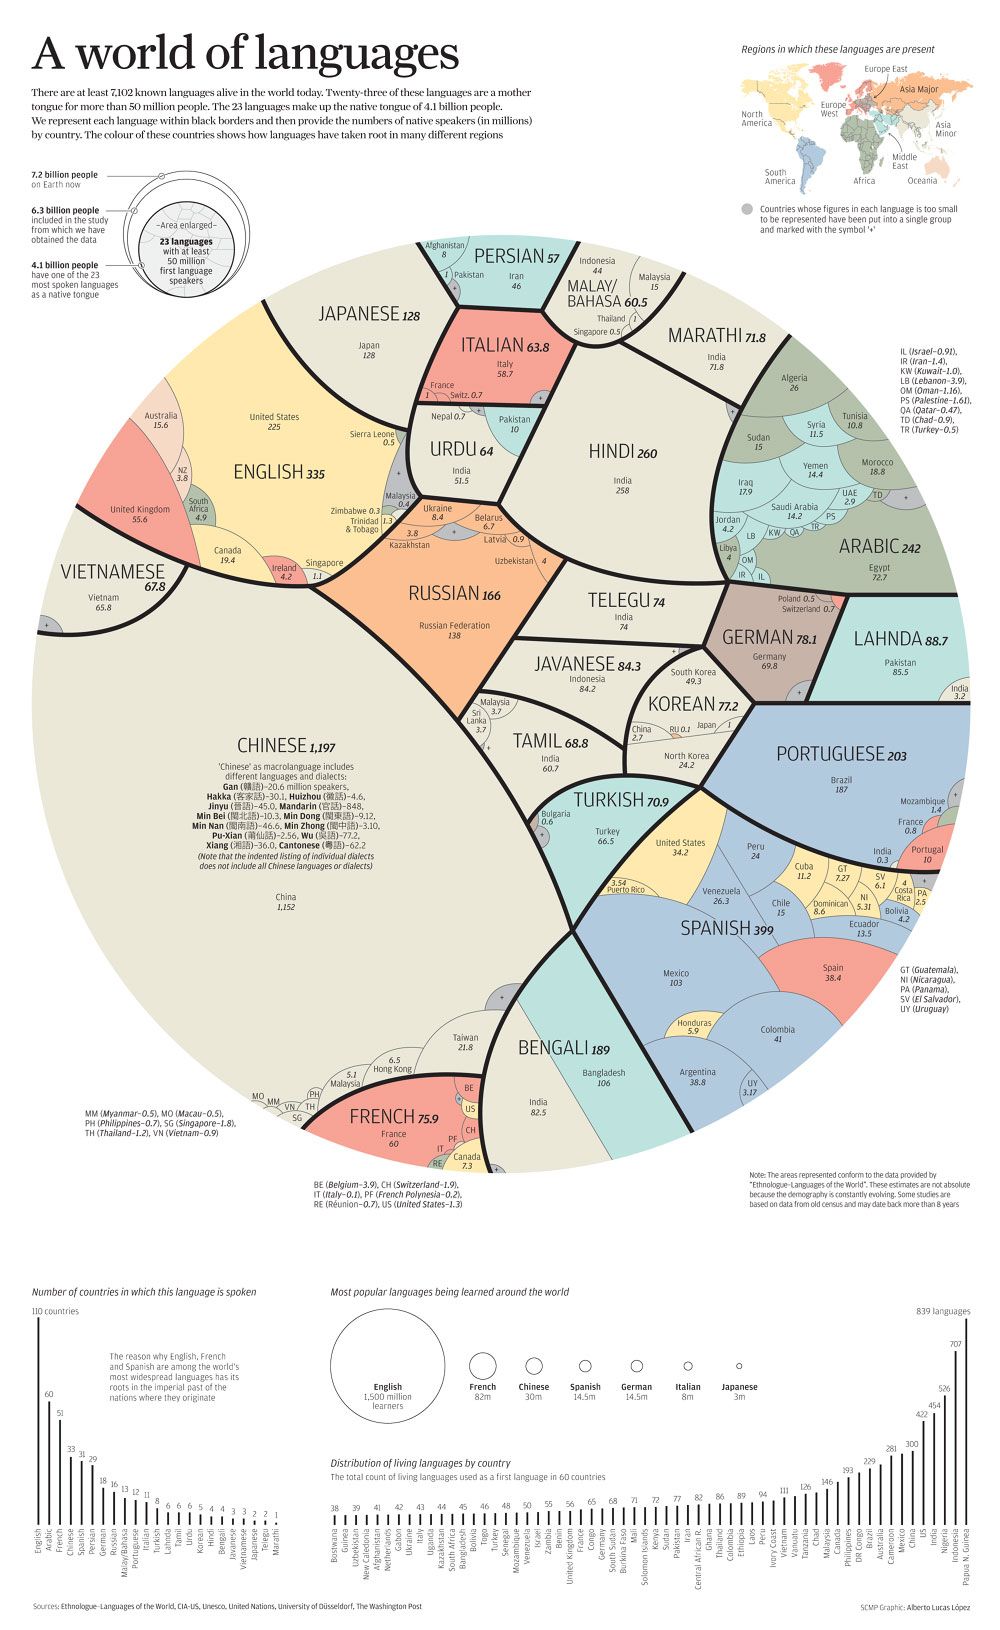 The World’s Most Spoken Languages in a Single Beautiful Infographic